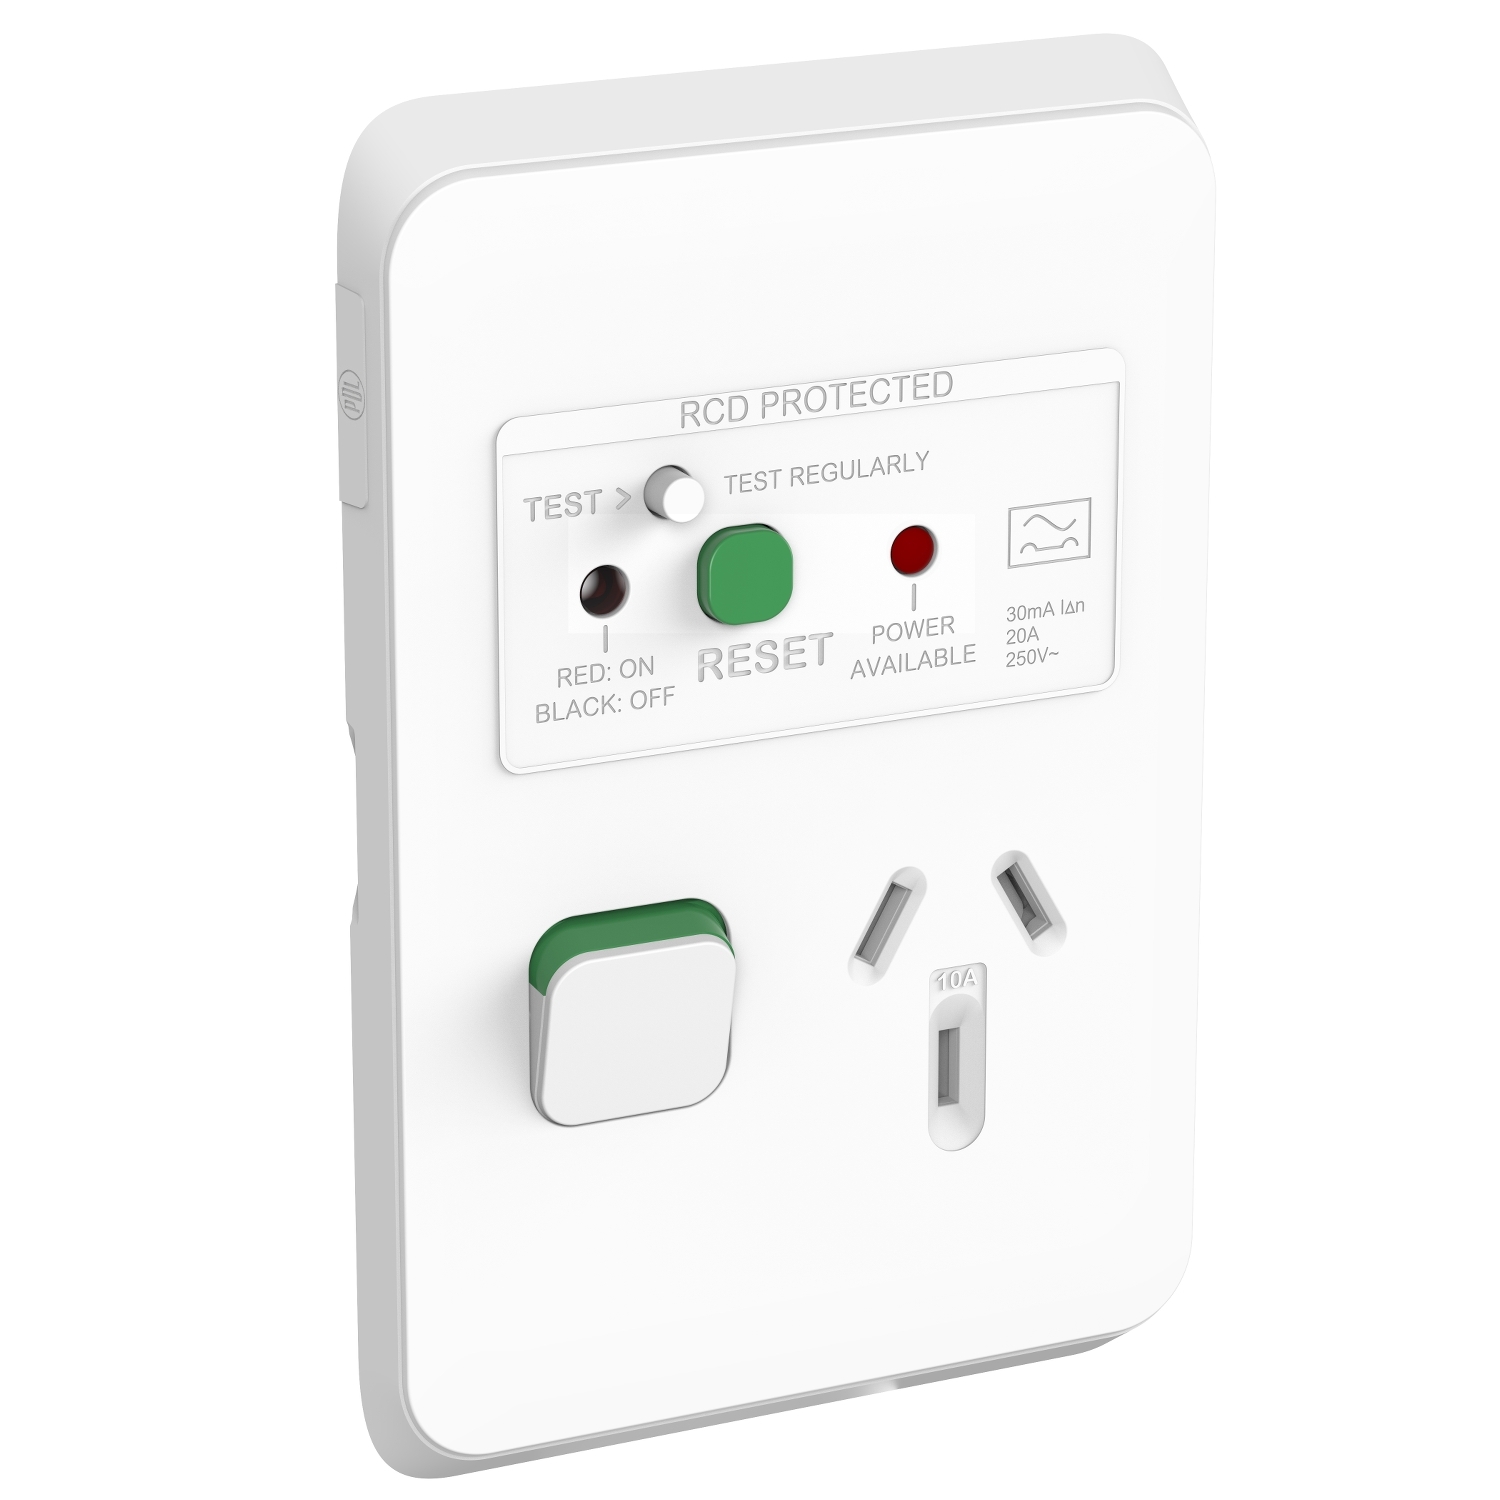 PDL Iconic - Switched Socket RCD 30mA Vertical 10A - Vivid White